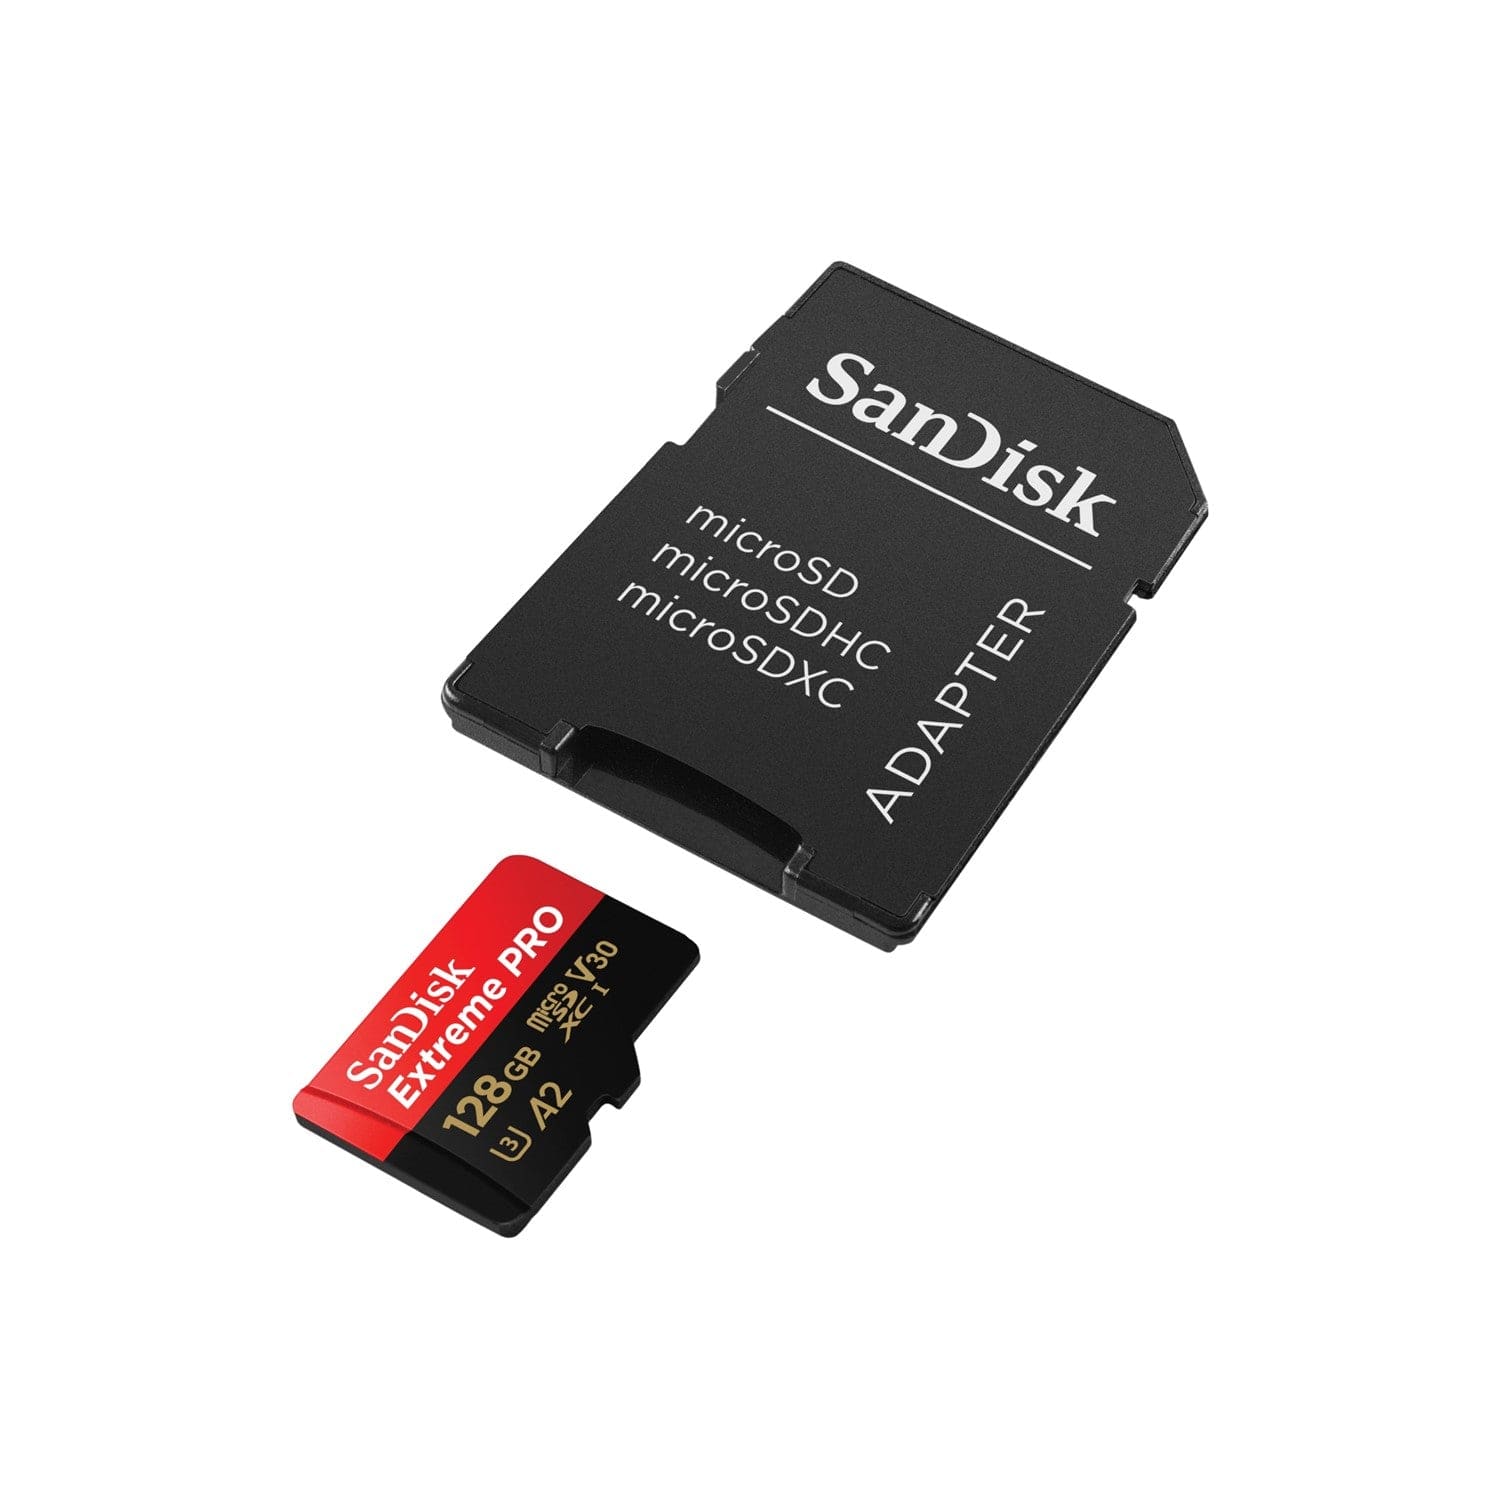 Sandisk Extreme Pro Micro SDXC Memory Card with Adapter